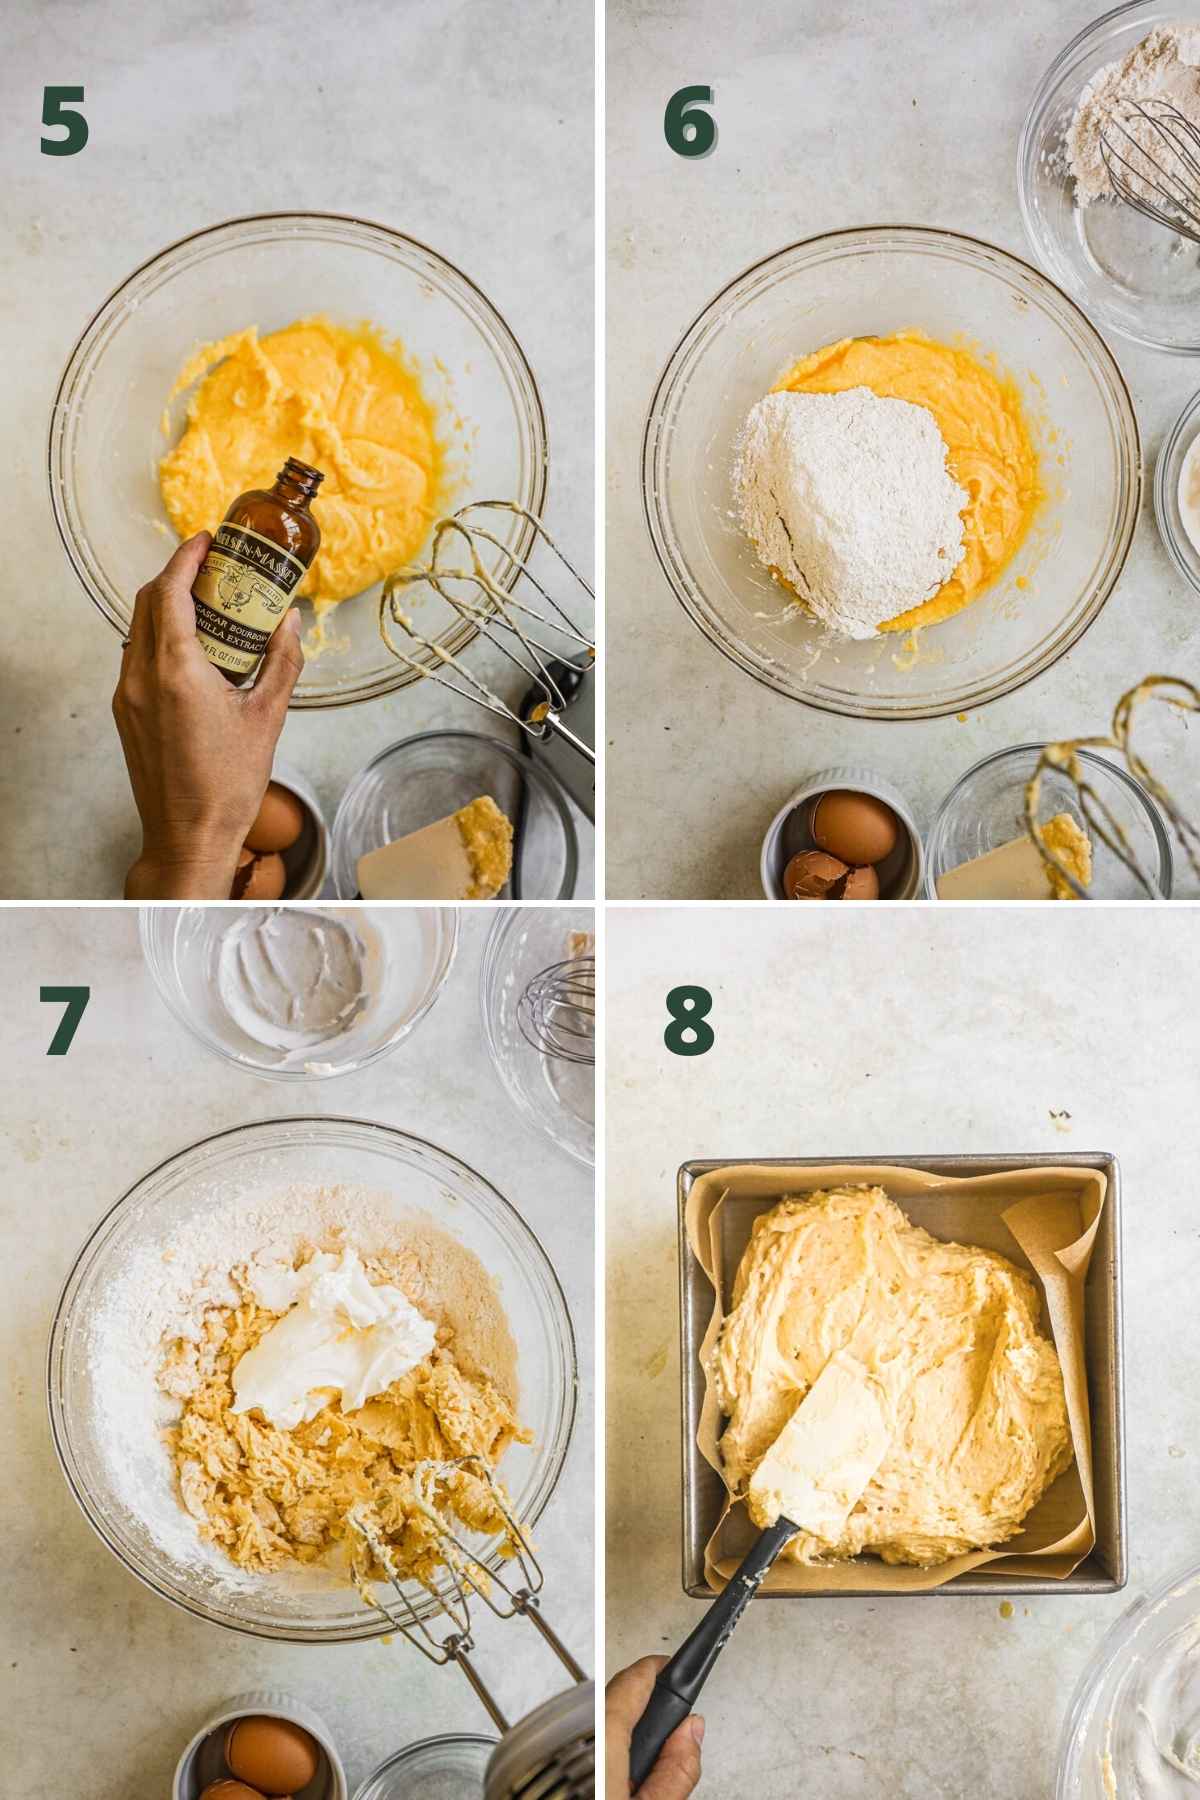 Steps to make passion fruit cake, add vanilla, flour, and sour cream; spread in a parchment paper-lined baking tray.